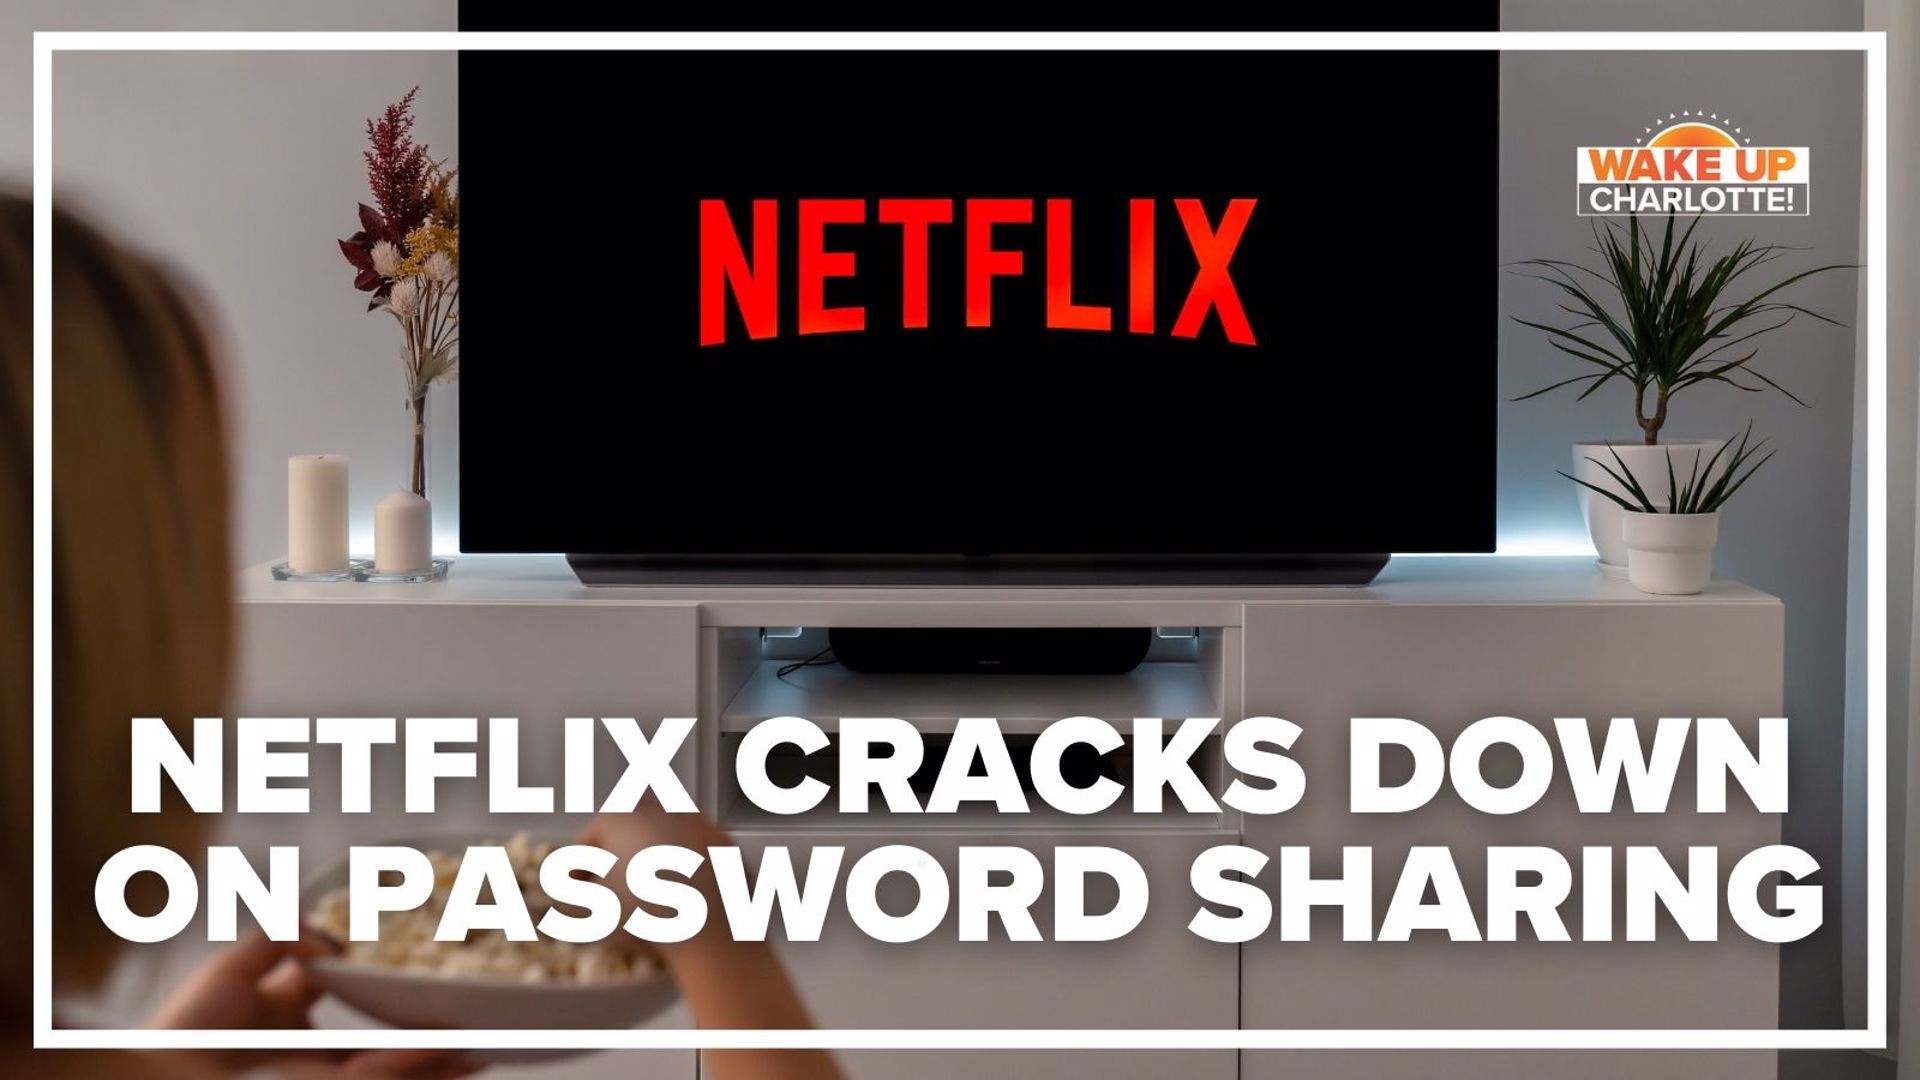 Netflix will limit streaming to people living in the same house. Users who share their passwords will be charged an extra $8 to continue streaming.